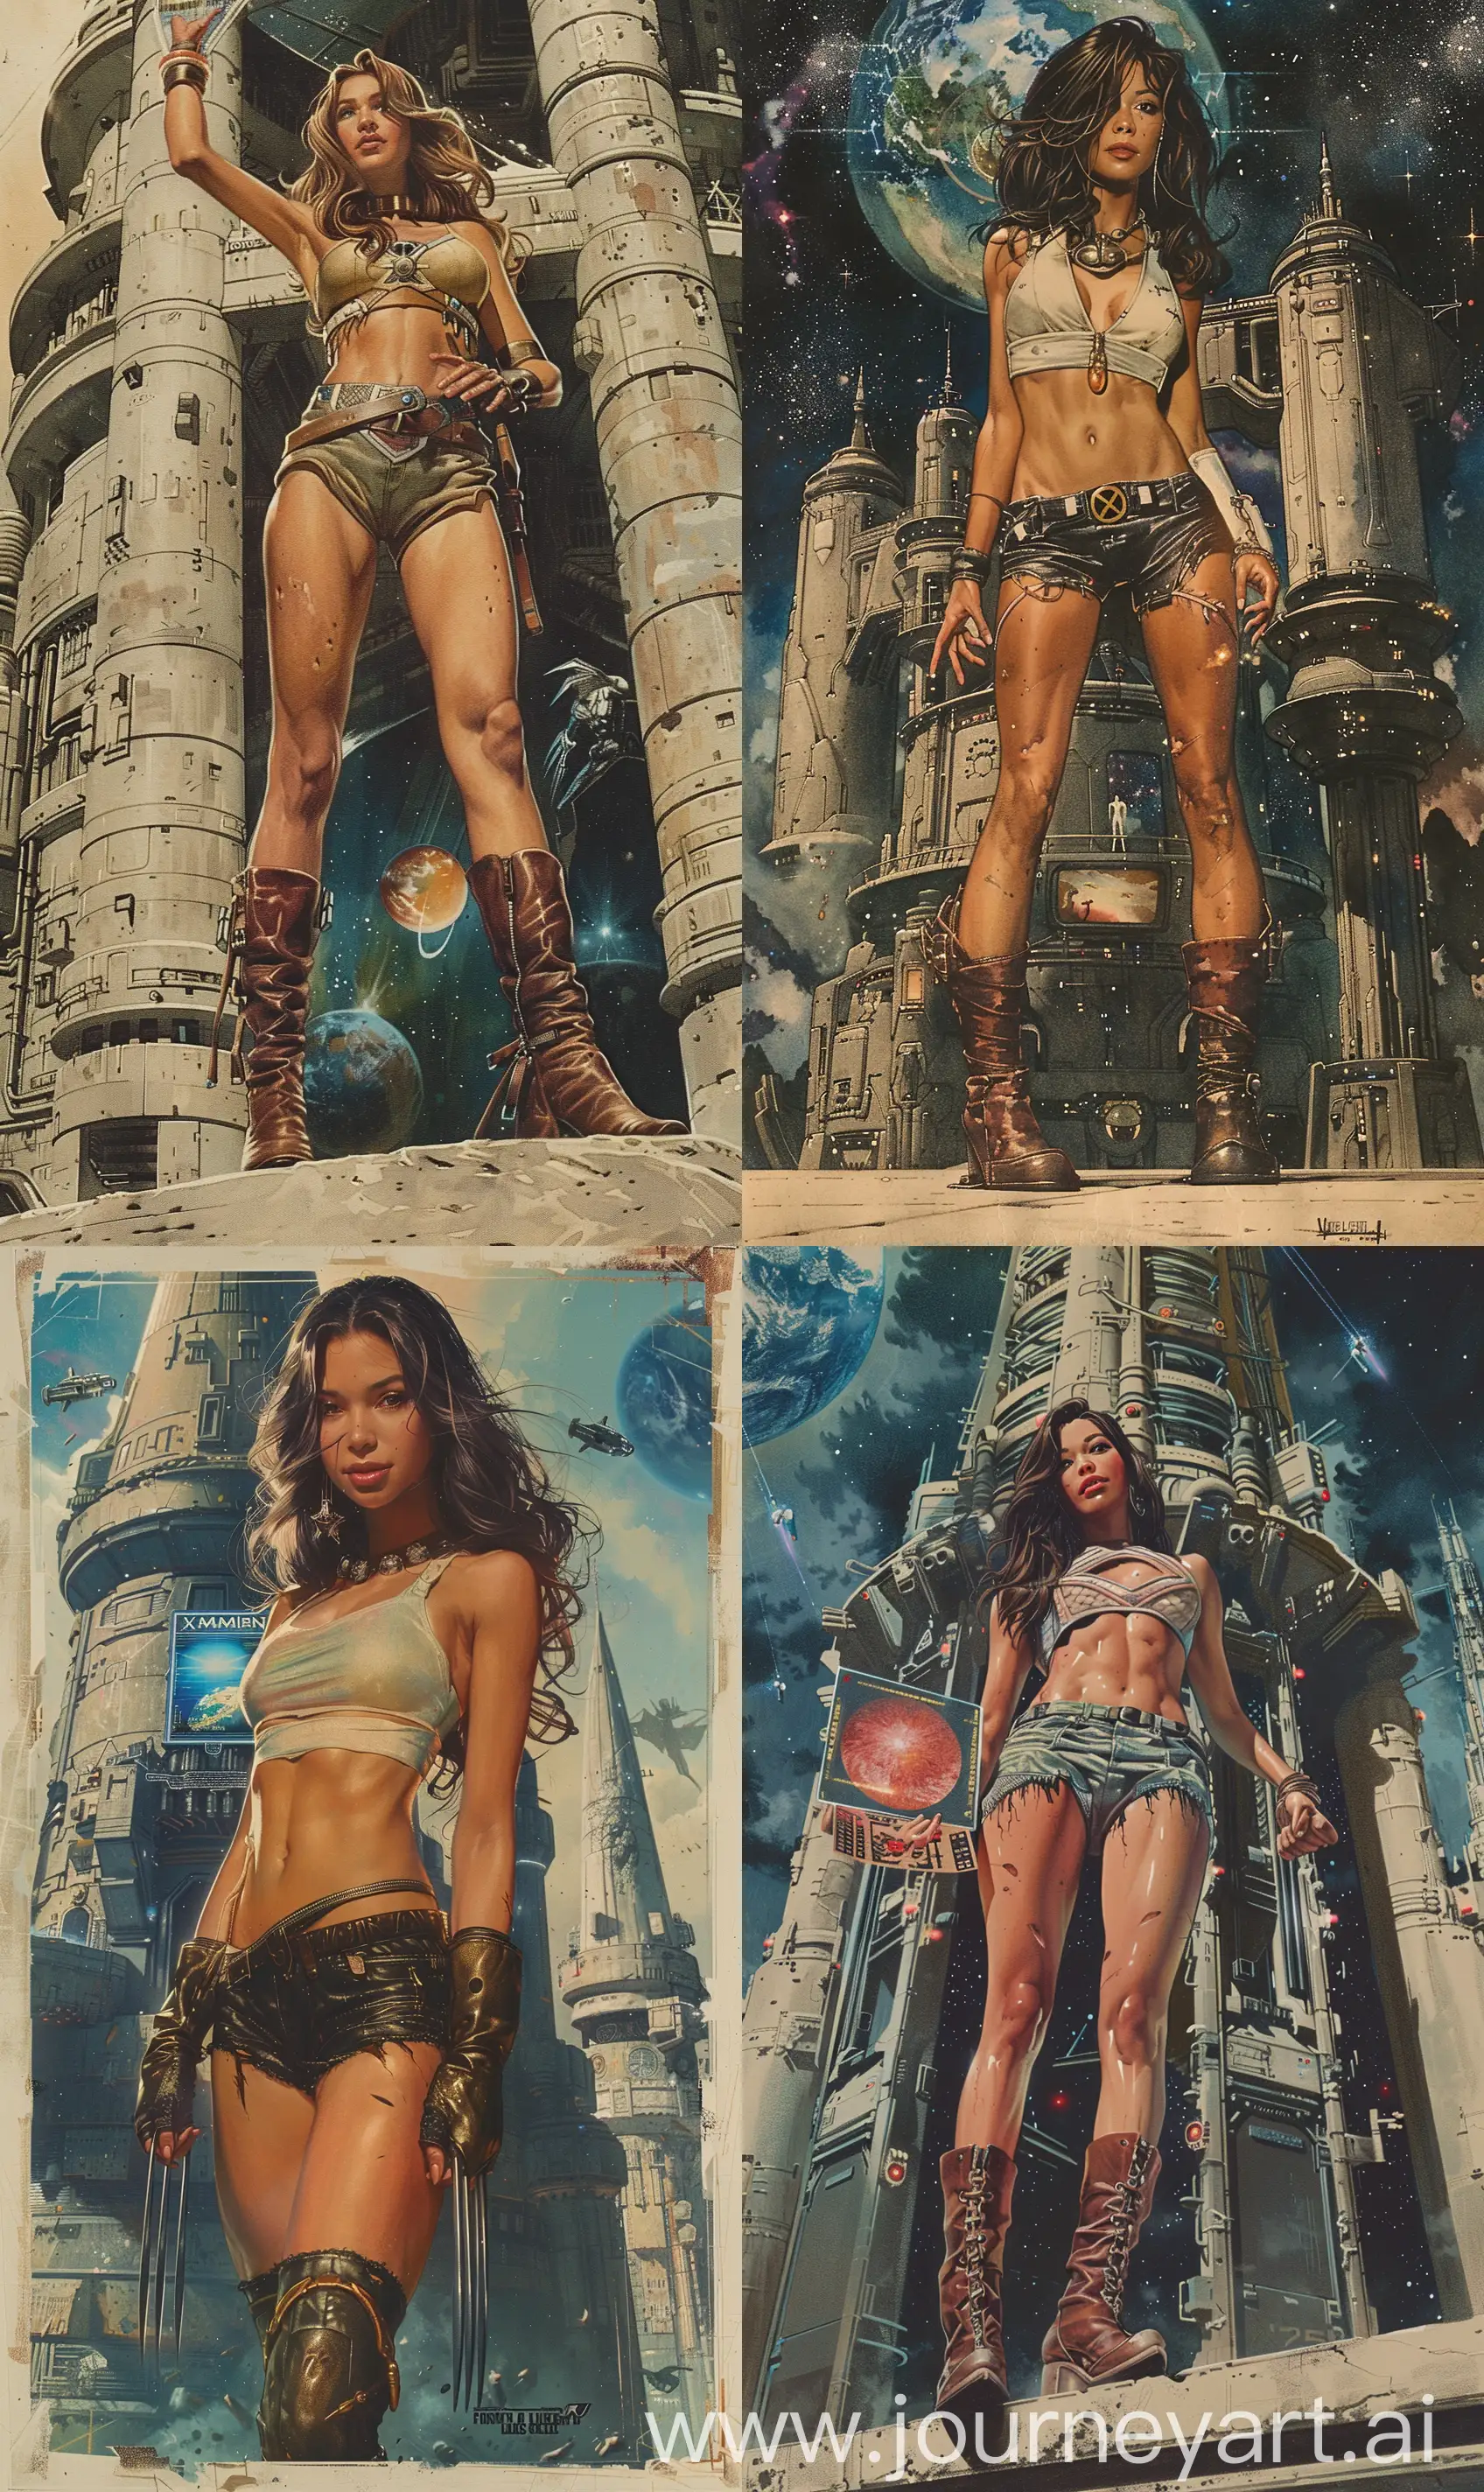 Future there's town of space stargate, standing on the spaceport a fantastic spacewarrior-queen in a halter top, short shorts and leather high boots, holding a hologram of our planet, on the back of a cyberport tower of wizards and spacemagic, Jim Lee and Luis Royo style, features, ancient, highly detailed, action poses, awesome face, complex, ultradetailing color composition, pencil art, X-Men comic book cover --v 6.0 --ar 9:15 --s 500